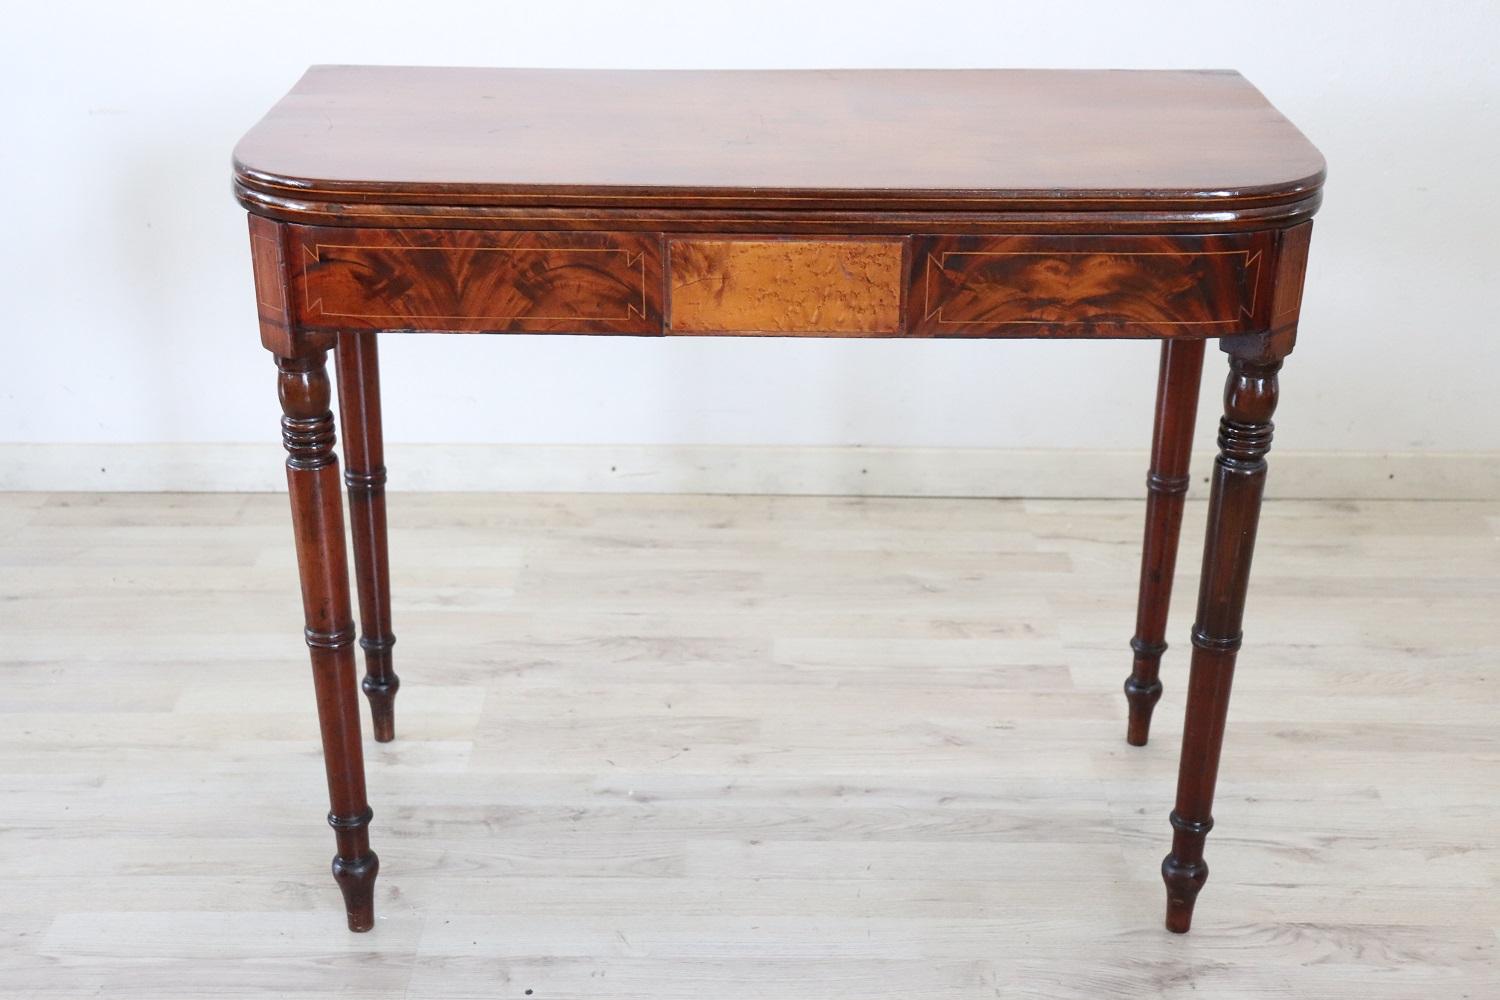 Beautiful very nice Italian solid walnut wood antique console table, 1850s. The table is very simple and linear, characterized by solid turned legs. The top of this table opens like a book page and doubles in size. The dimensions of the top when it